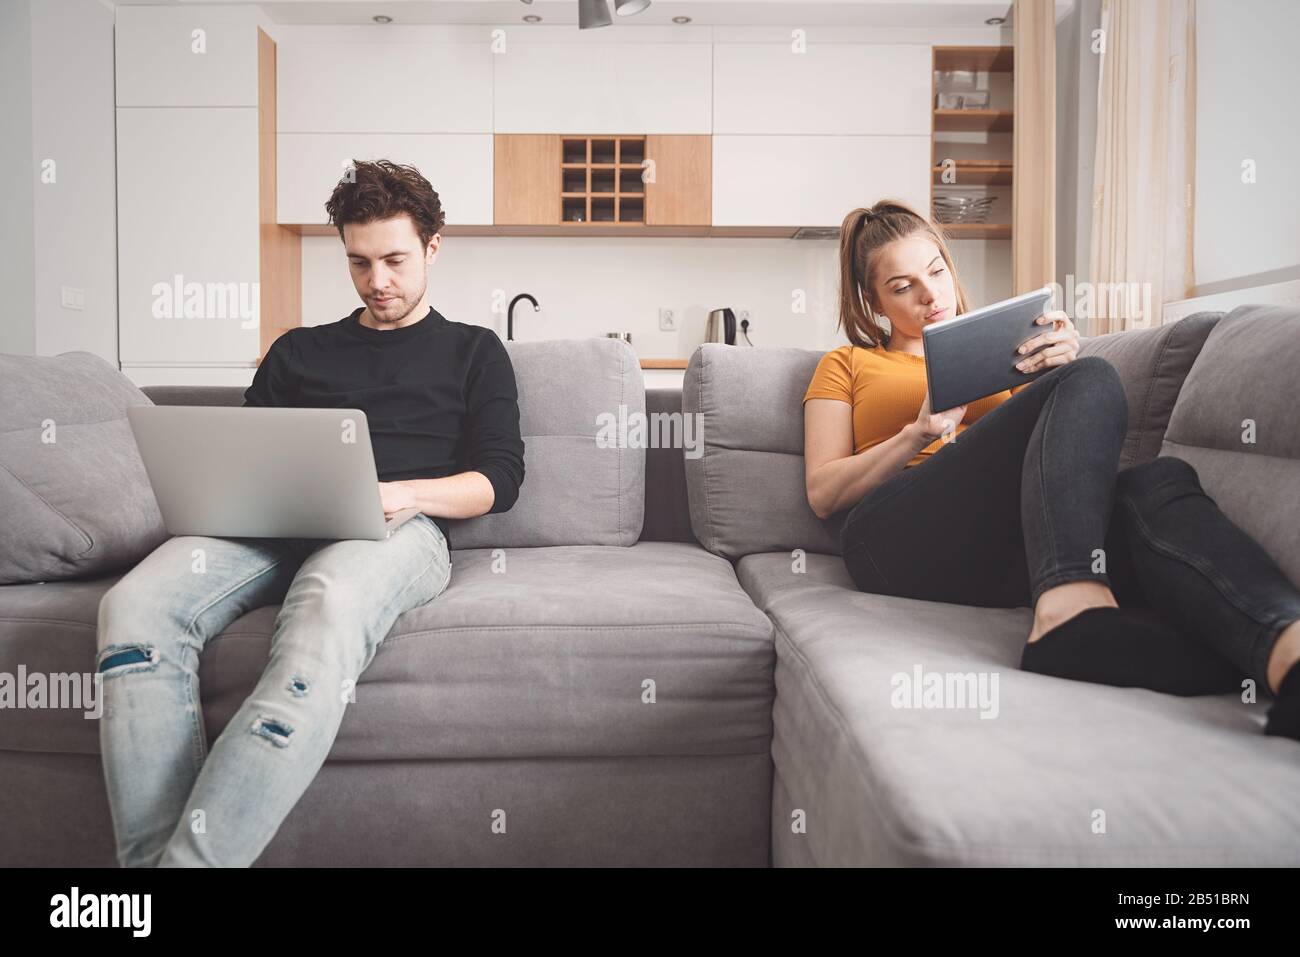 Crisis in a partnership, separation, internet addiction. Couple separated on sofa in living room Stock Photo